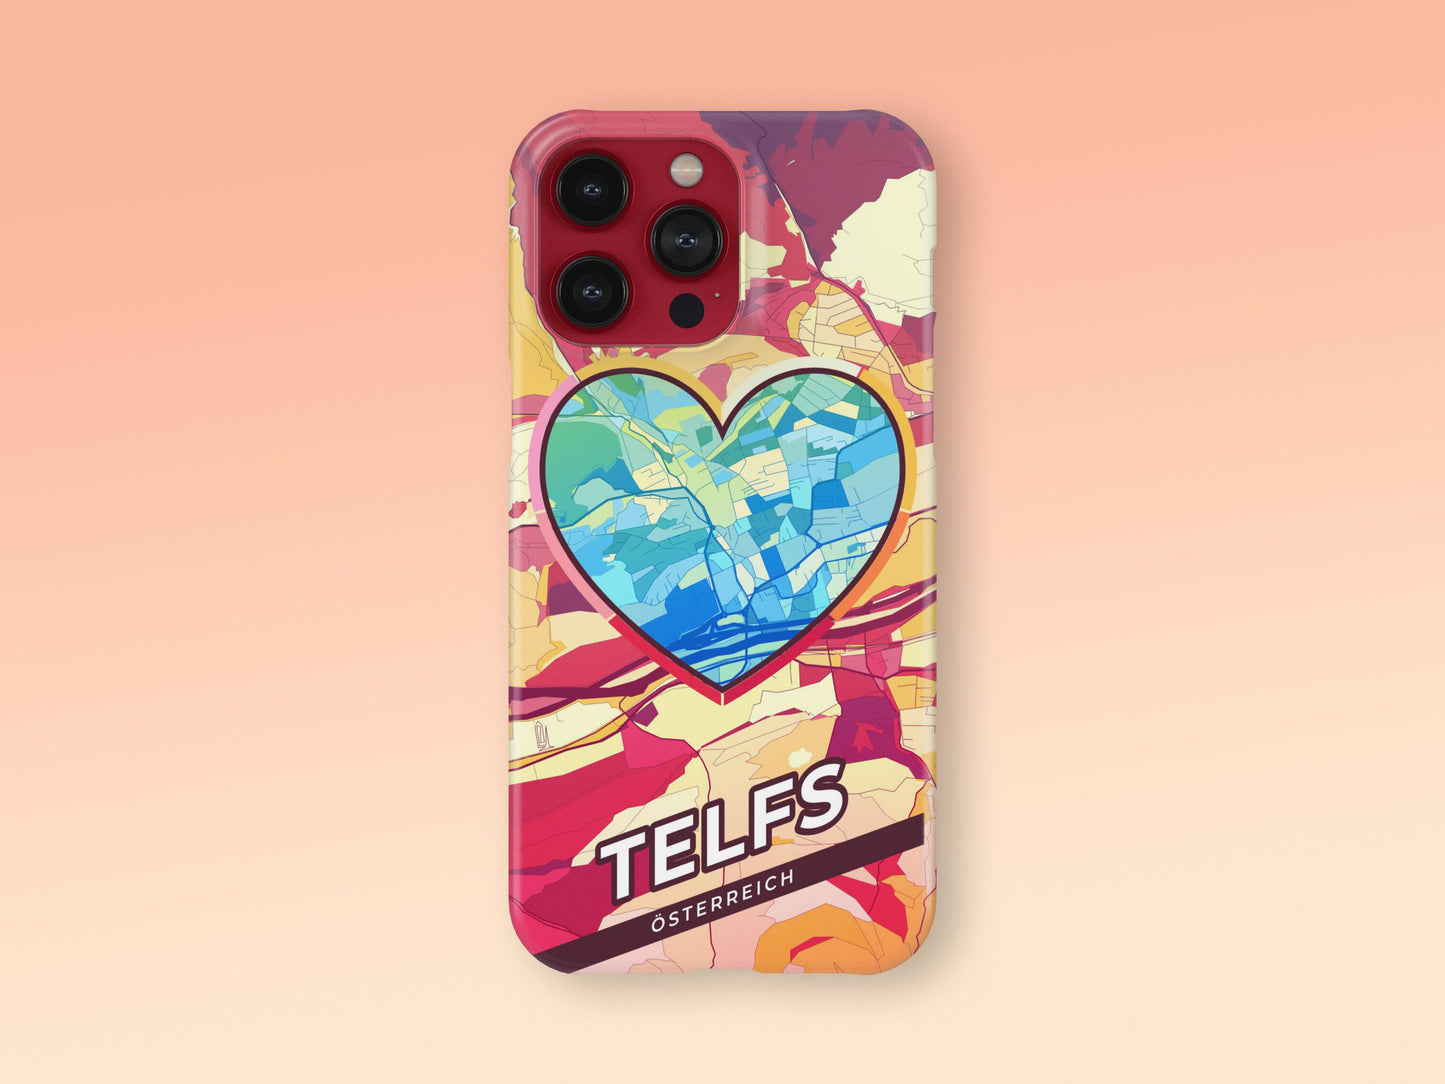 Telfs Österreich slim phone case with colorful icon. Birthday, wedding or housewarming gift. Couple match cases. 2